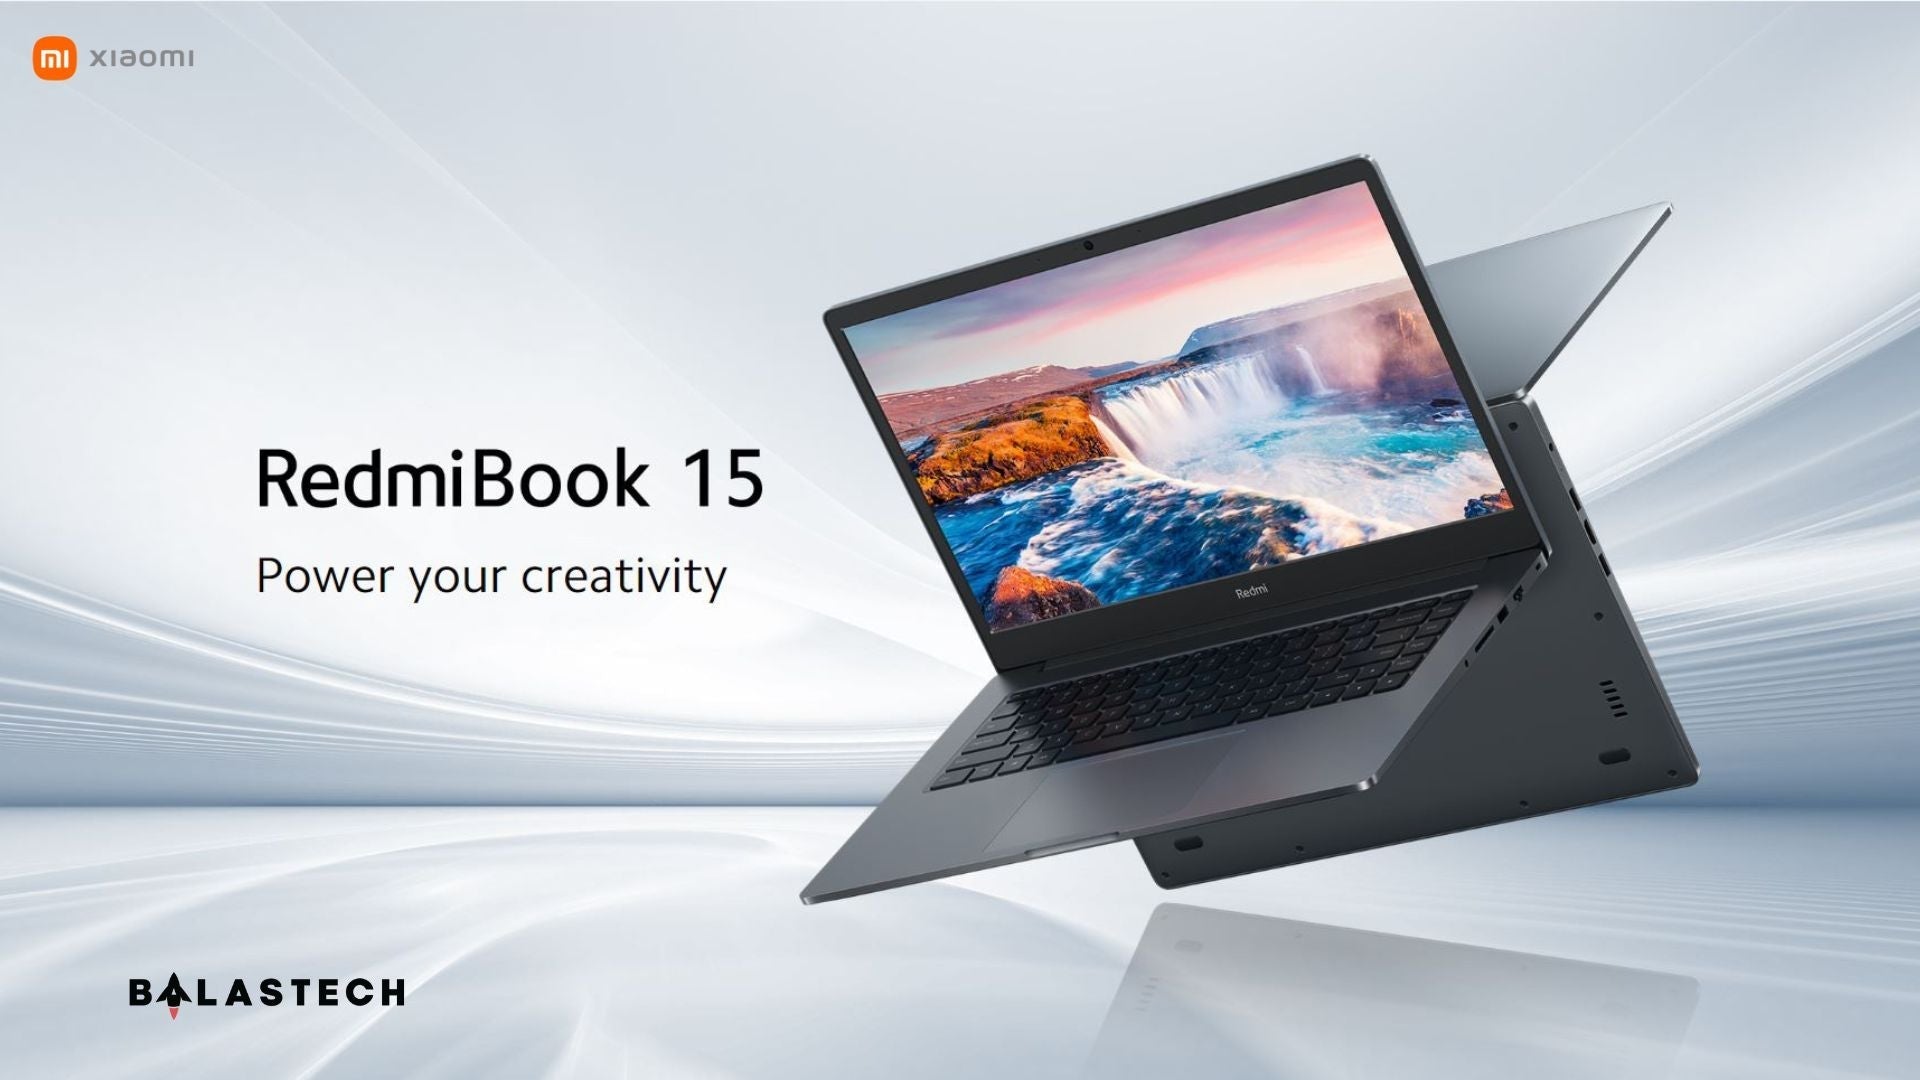 XIAOMI REDMIBOOK 15 INTEL CORE I3 11TH GEN/8 GB/256 GB SSD/WINDOWS 11 HOME/15.6 INCHES (39.62 CMS) FHD ANTI GLARE/MS OFFICE/CHARCOAL GRAY/1.8 KG THIN AND LIGHT LAPTOP-LAPTOP-Makotek Computers